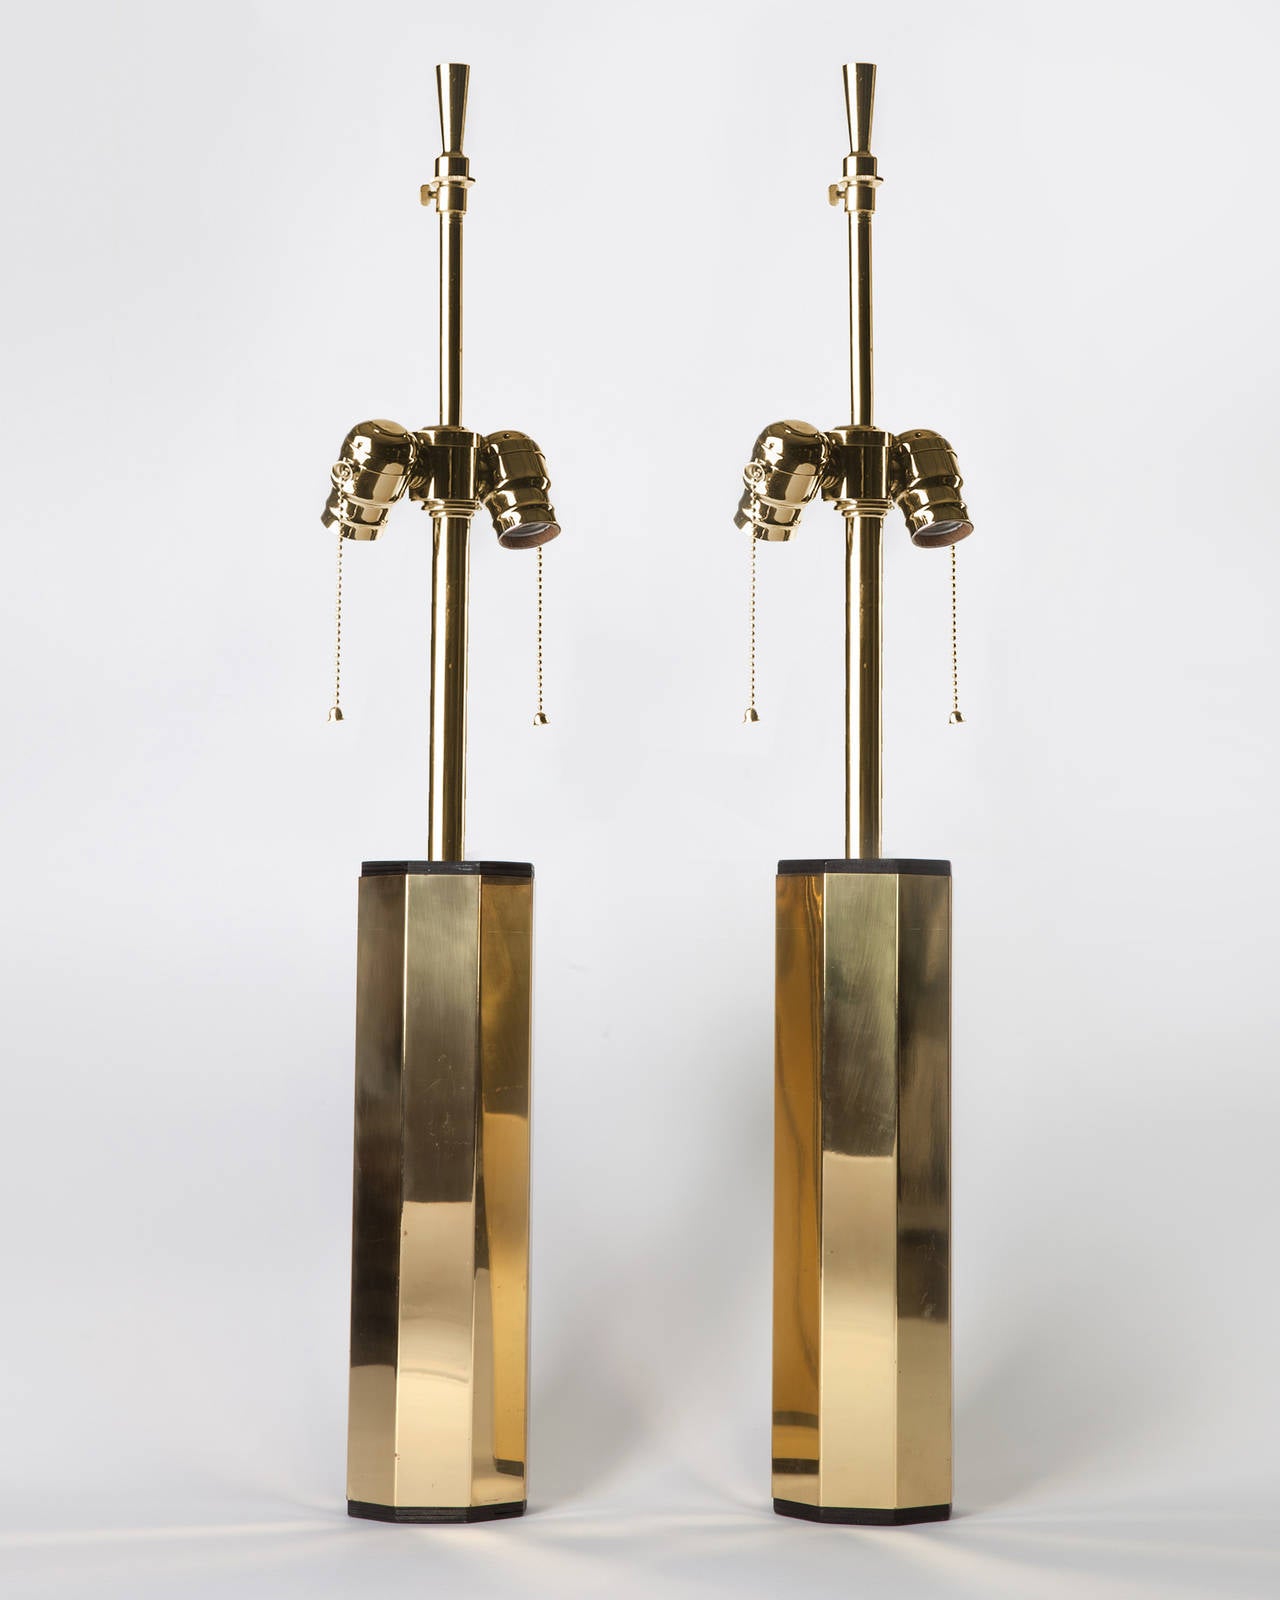 ATL1897

A pair of octagonal brass lamps with blackened wood elements. In their original polished and lacquered brass finish. Signed by the Swedish maker Hans-Agne Jakobsson.

Dimensions:
Overall: 32-1/2